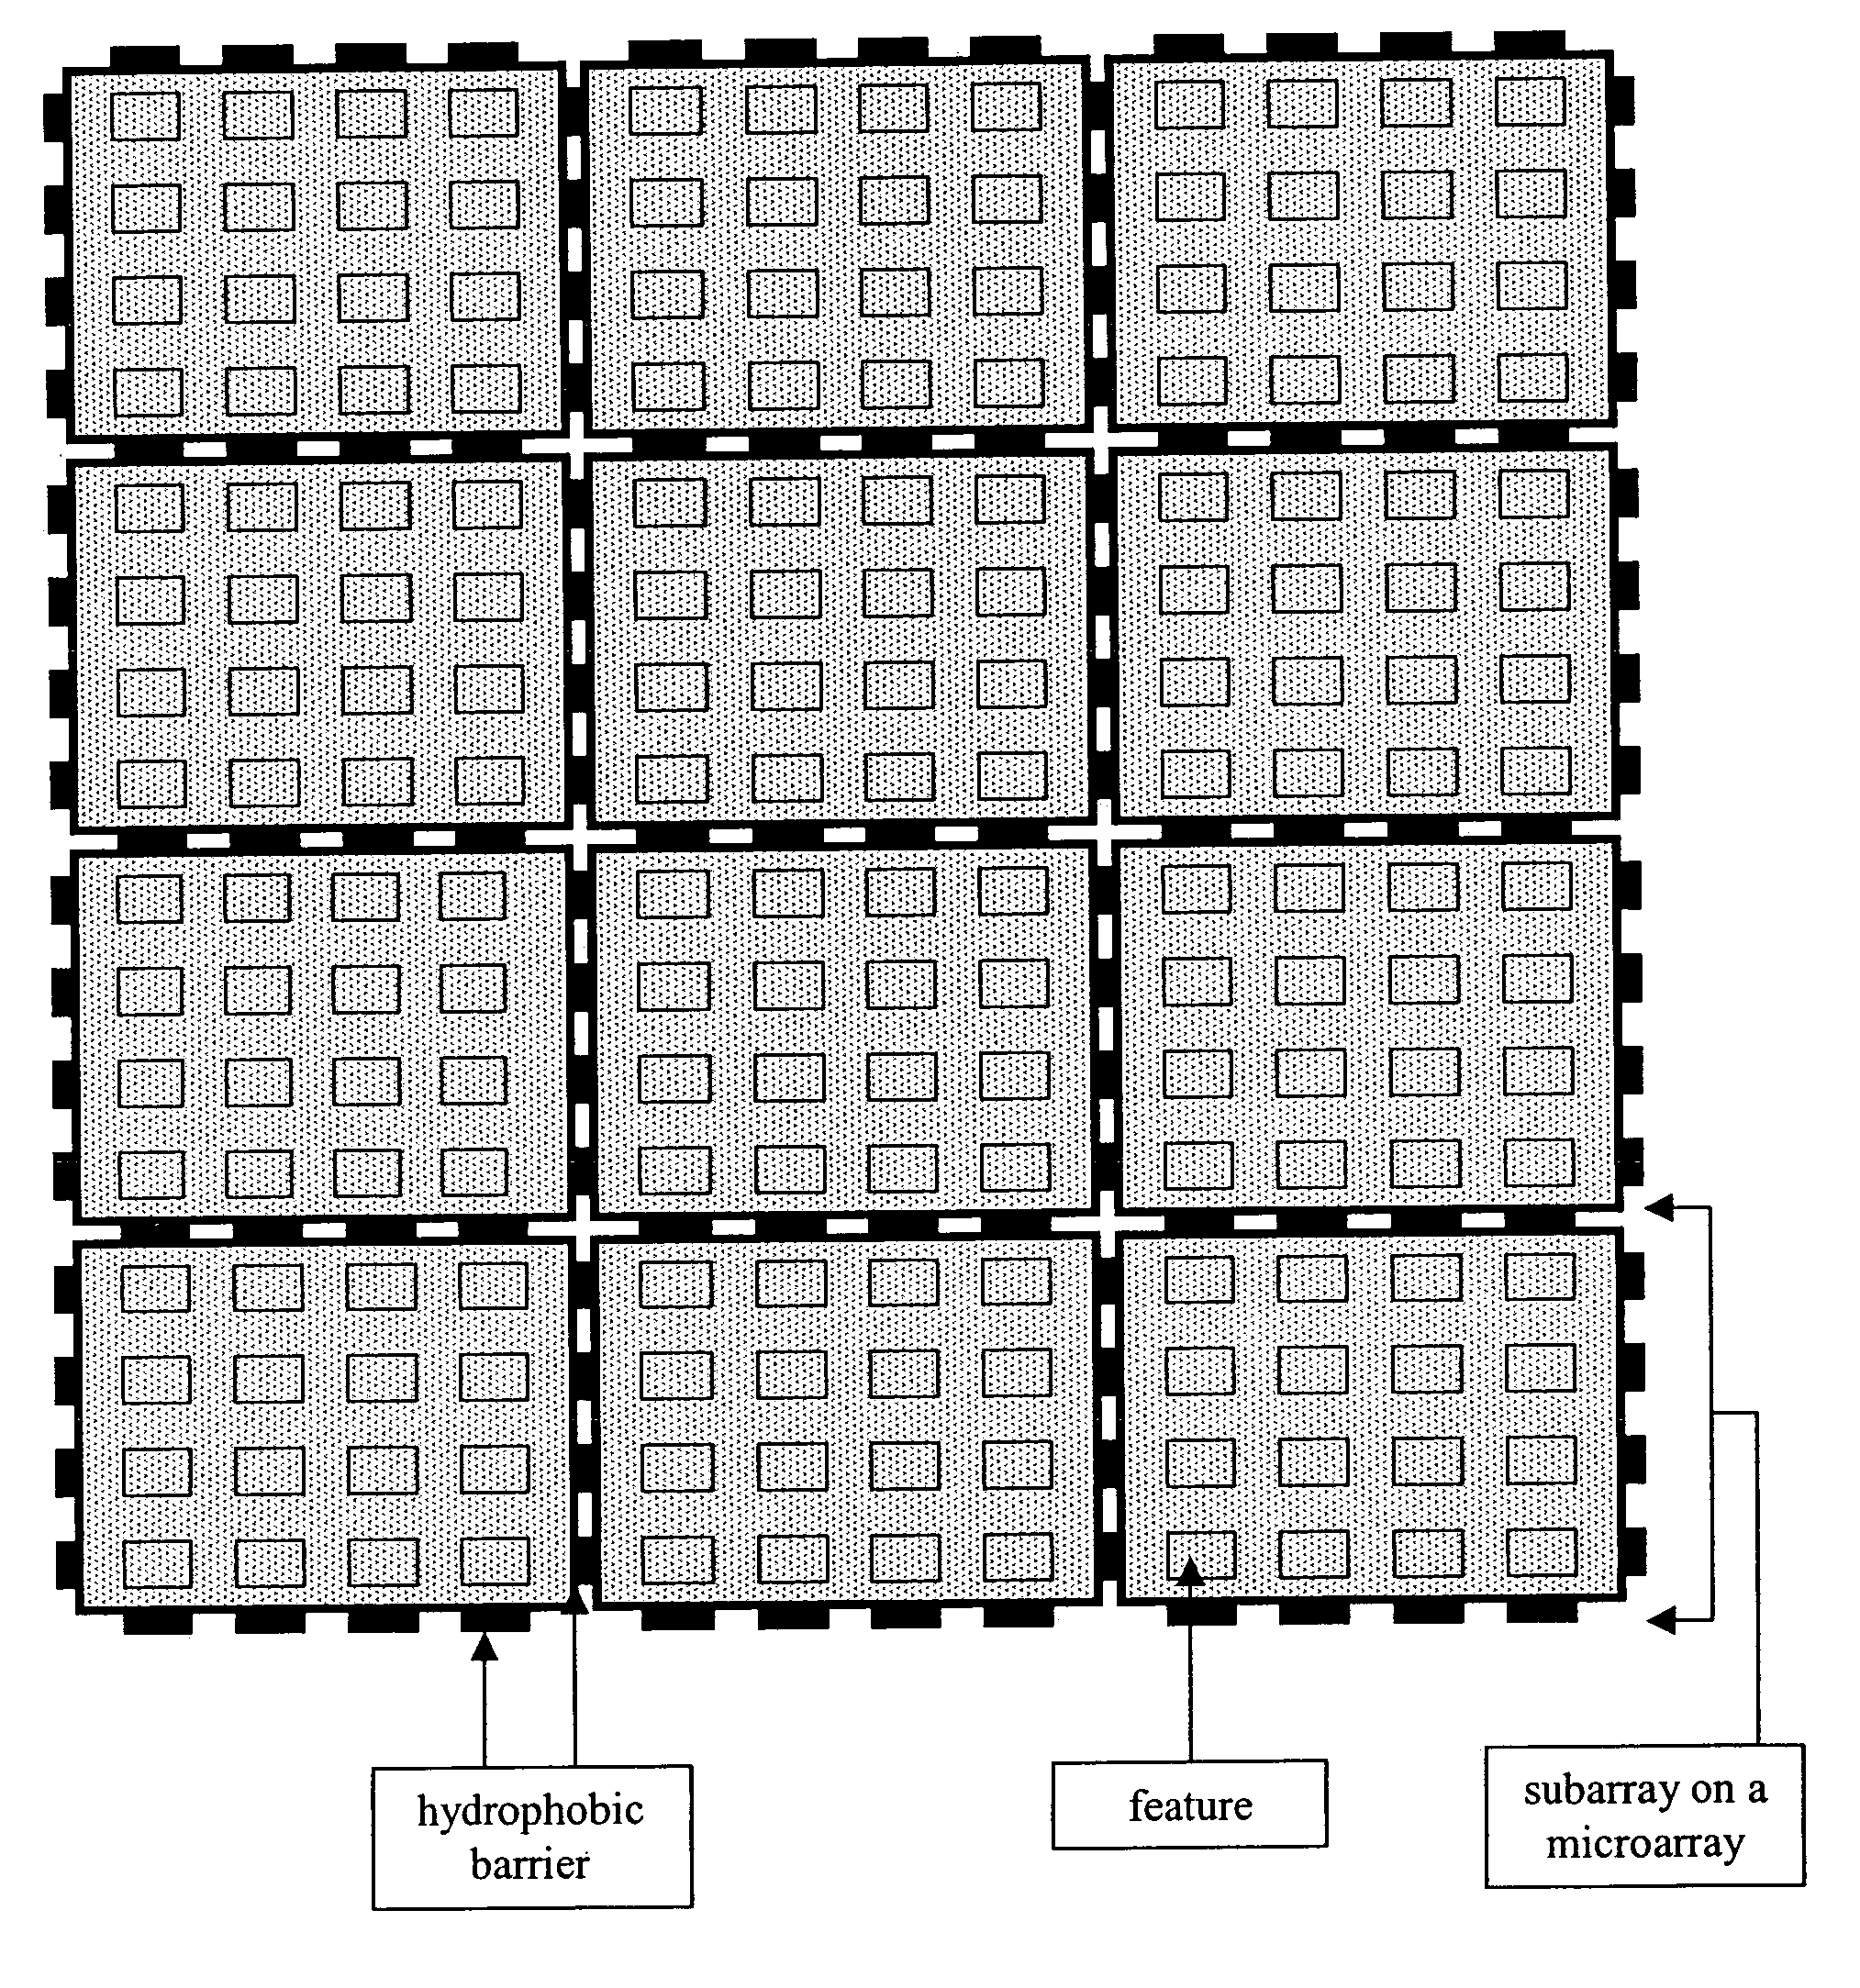 Microarray with hydrophobic barriers